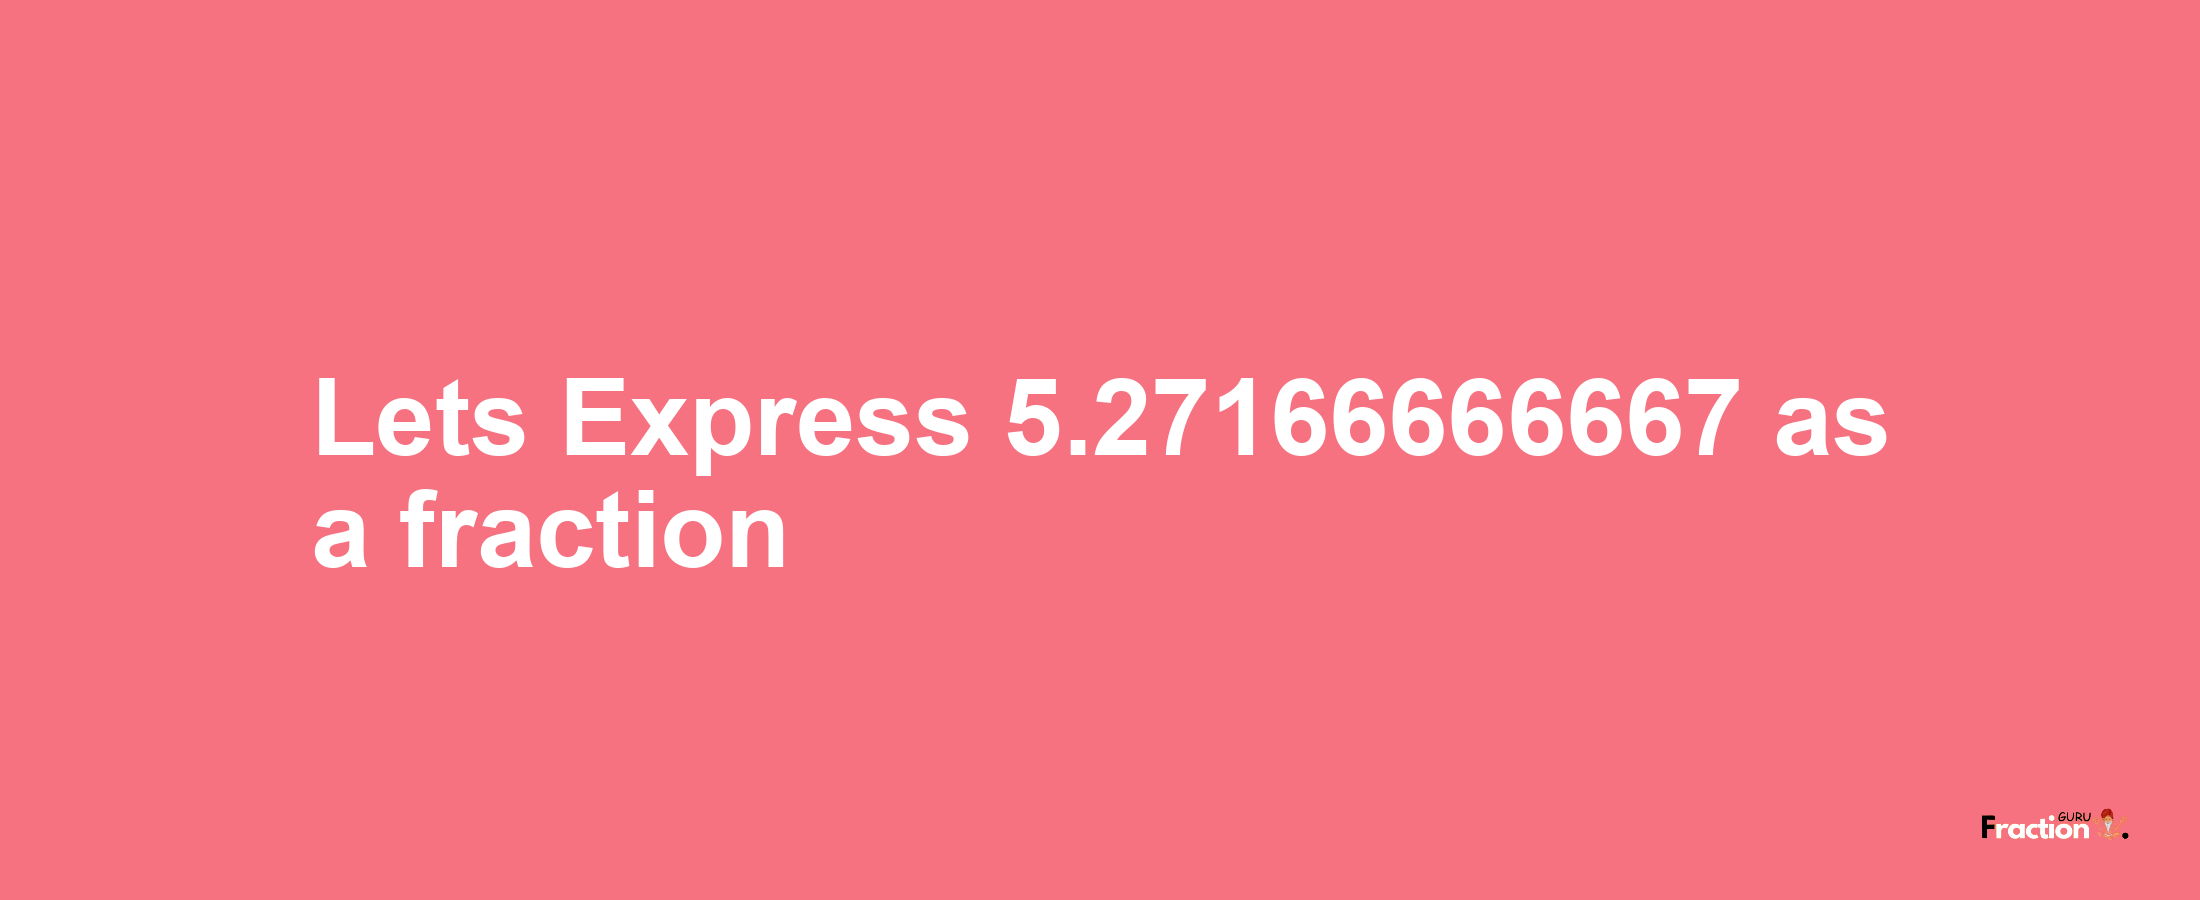 Lets Express 5.27166666667 as afraction